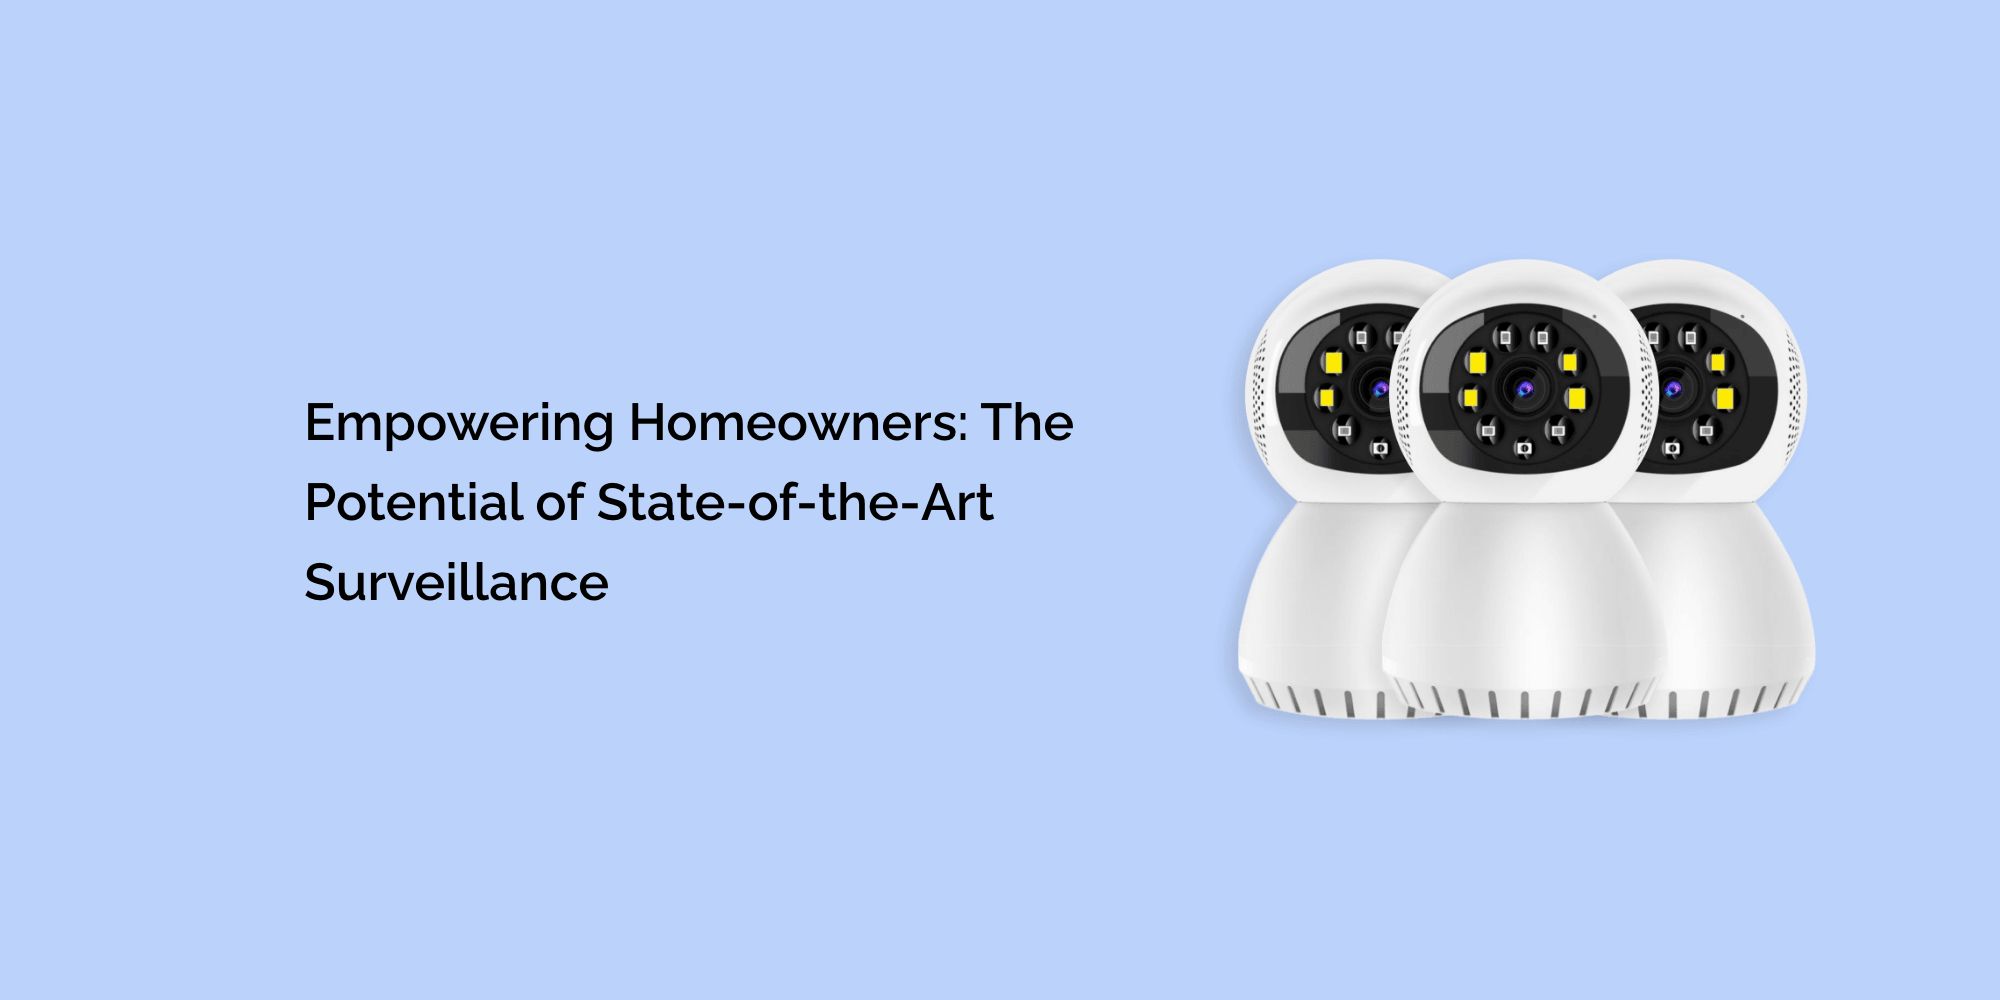 Empowering Homeowners: The Potential of State-of-the-Art Surveillance